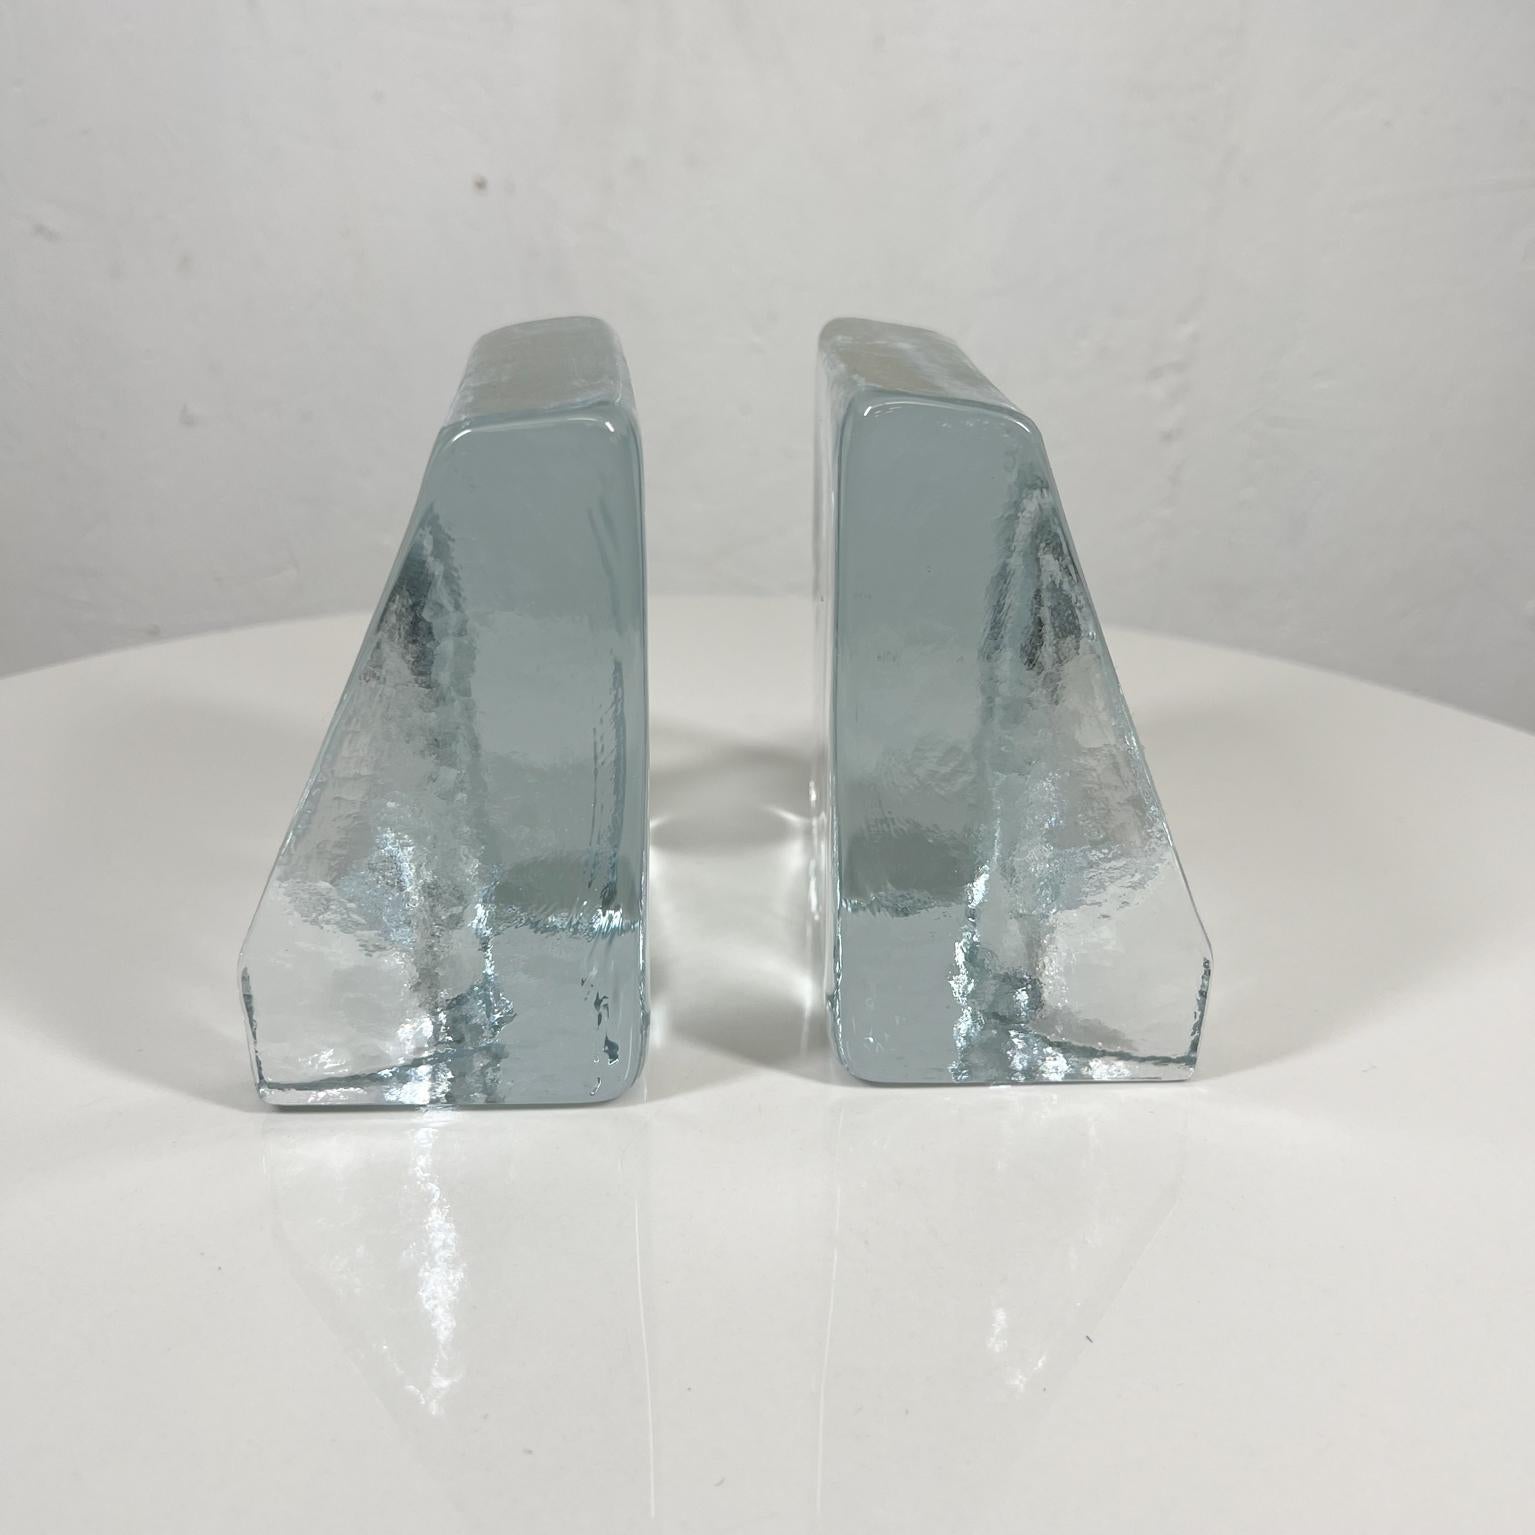 1960s Fine pair of sculptural Blenko Handcrafted wedge-shaped Clear Glass Bookends
Designer Wayne Husted
5.13 tall x 5 w x 3 d
Preowned unrestored vintage original condition
See images please.


